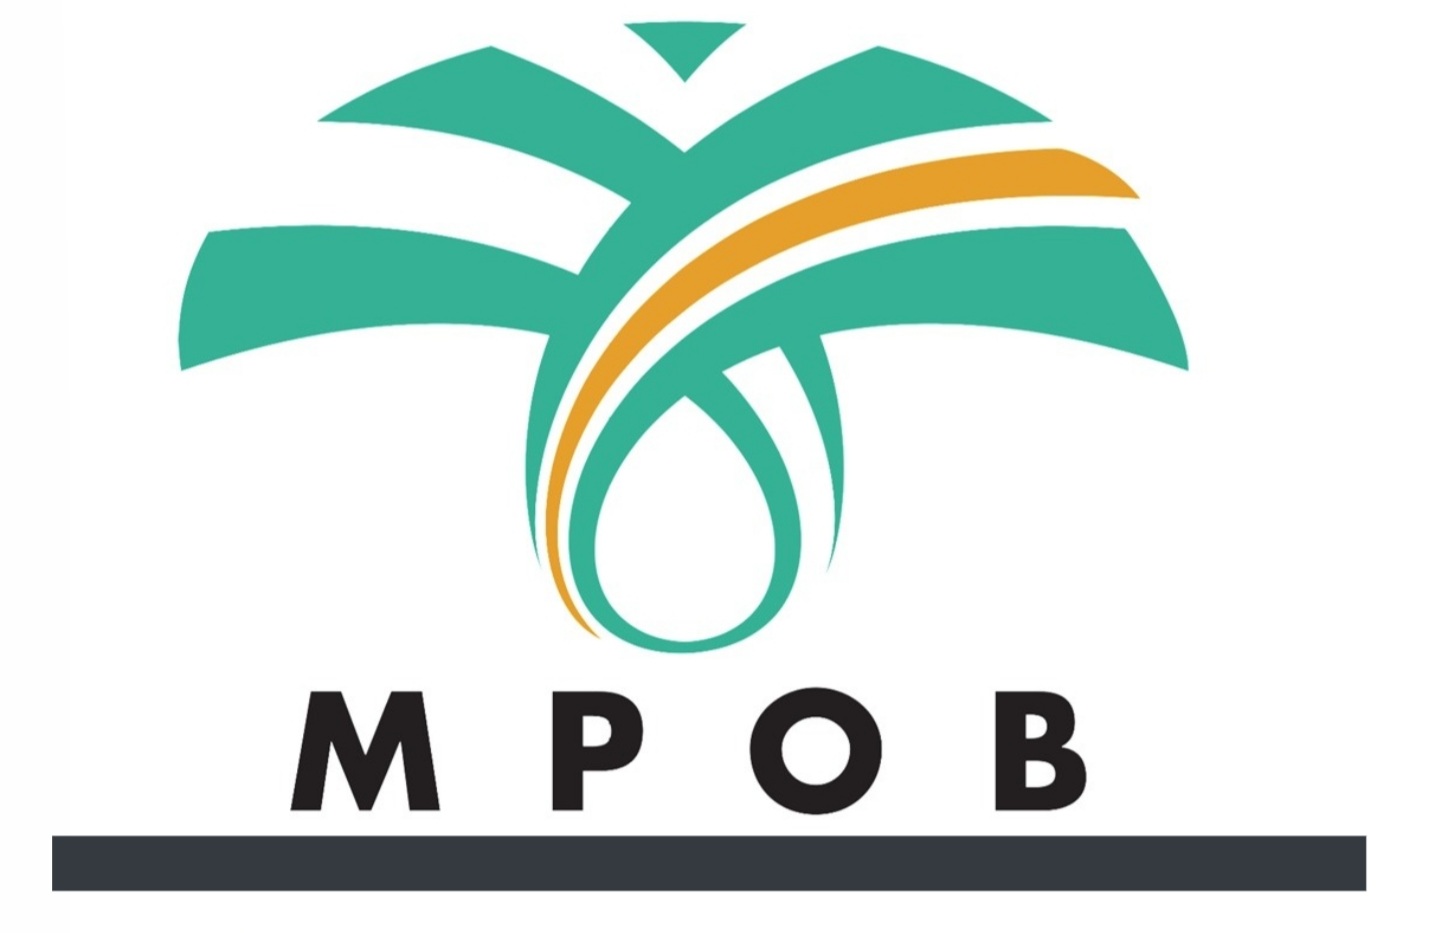 MPOB, SME Corp to hold webinar on palm technology commercialisation, funding